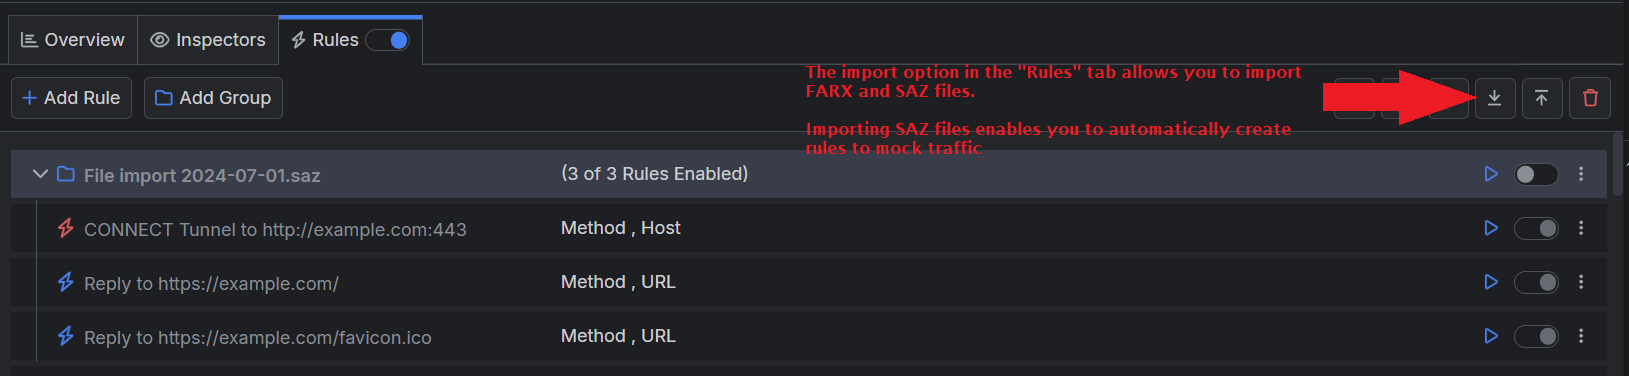 Loading SAZ in RUles tab to automaticaly created a set of new rules